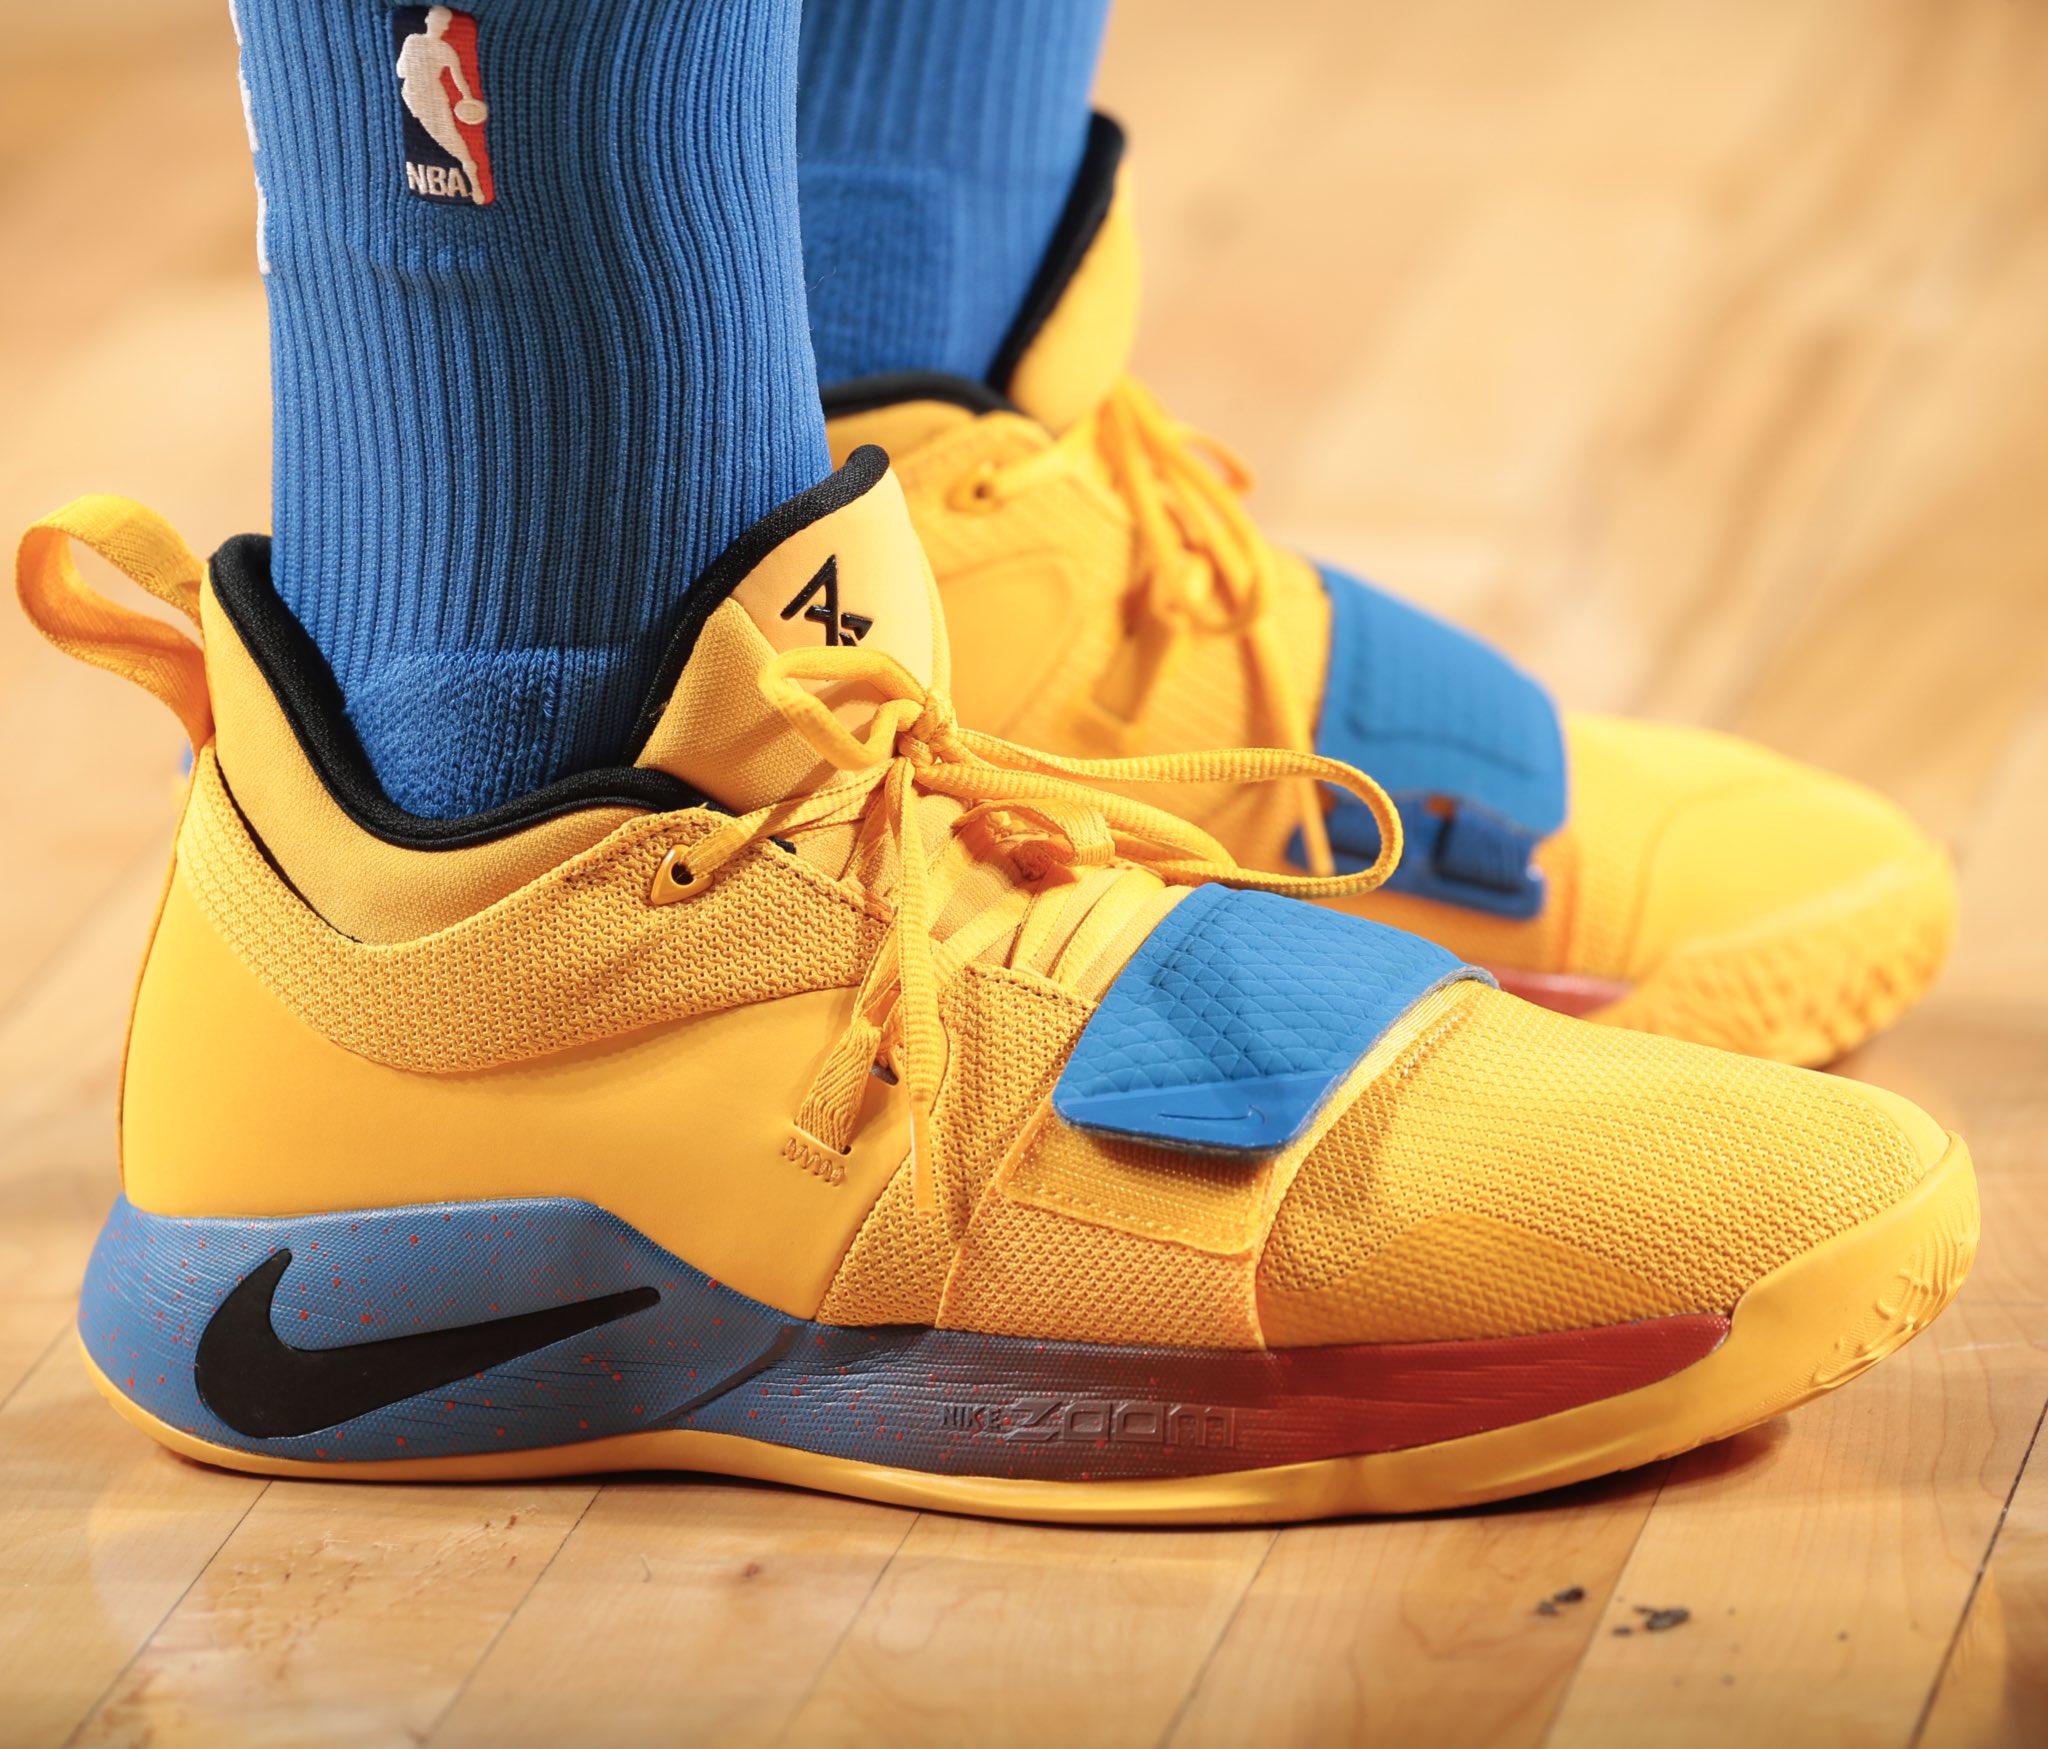 Adelante insalubre píldora SoleCollector.com on Twitter: "#SoleWatch: @Yg_Trece wearing a Nike PG 2.5  PE against the Mavs. 📸: Glenn James https://t.co/tuqRIPrcos" / Twitter